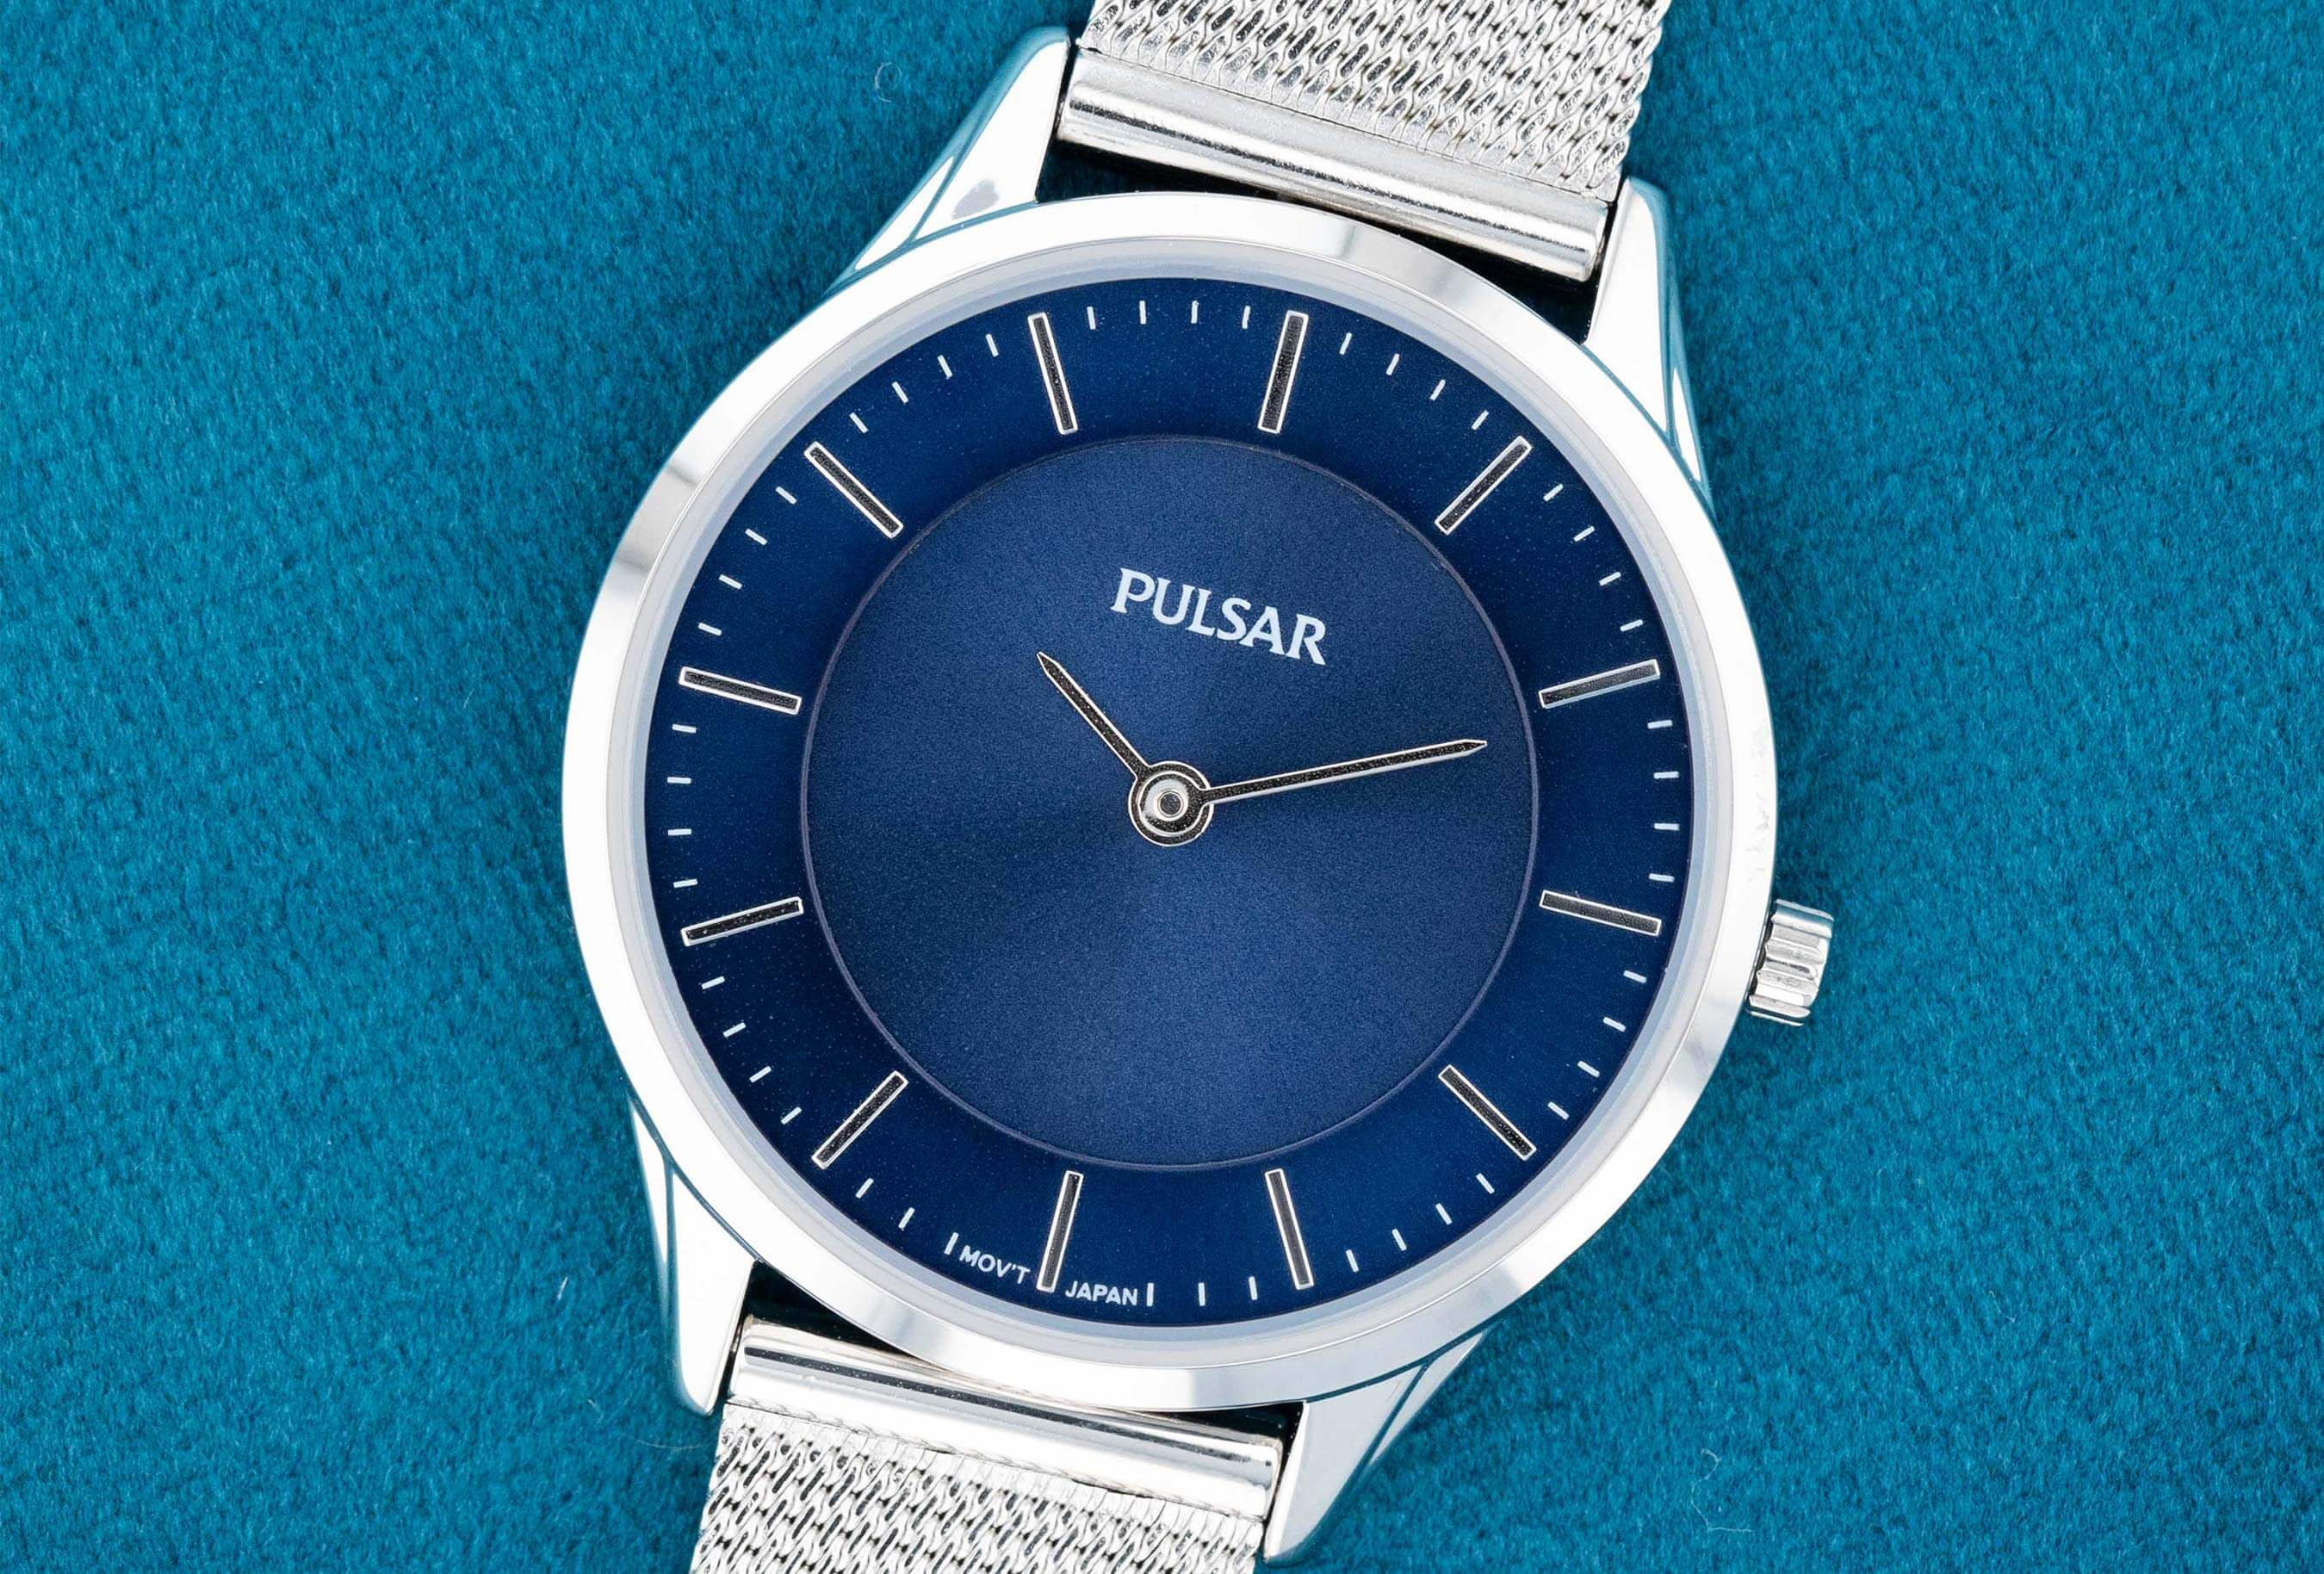 Are Pulsar Watches Good?